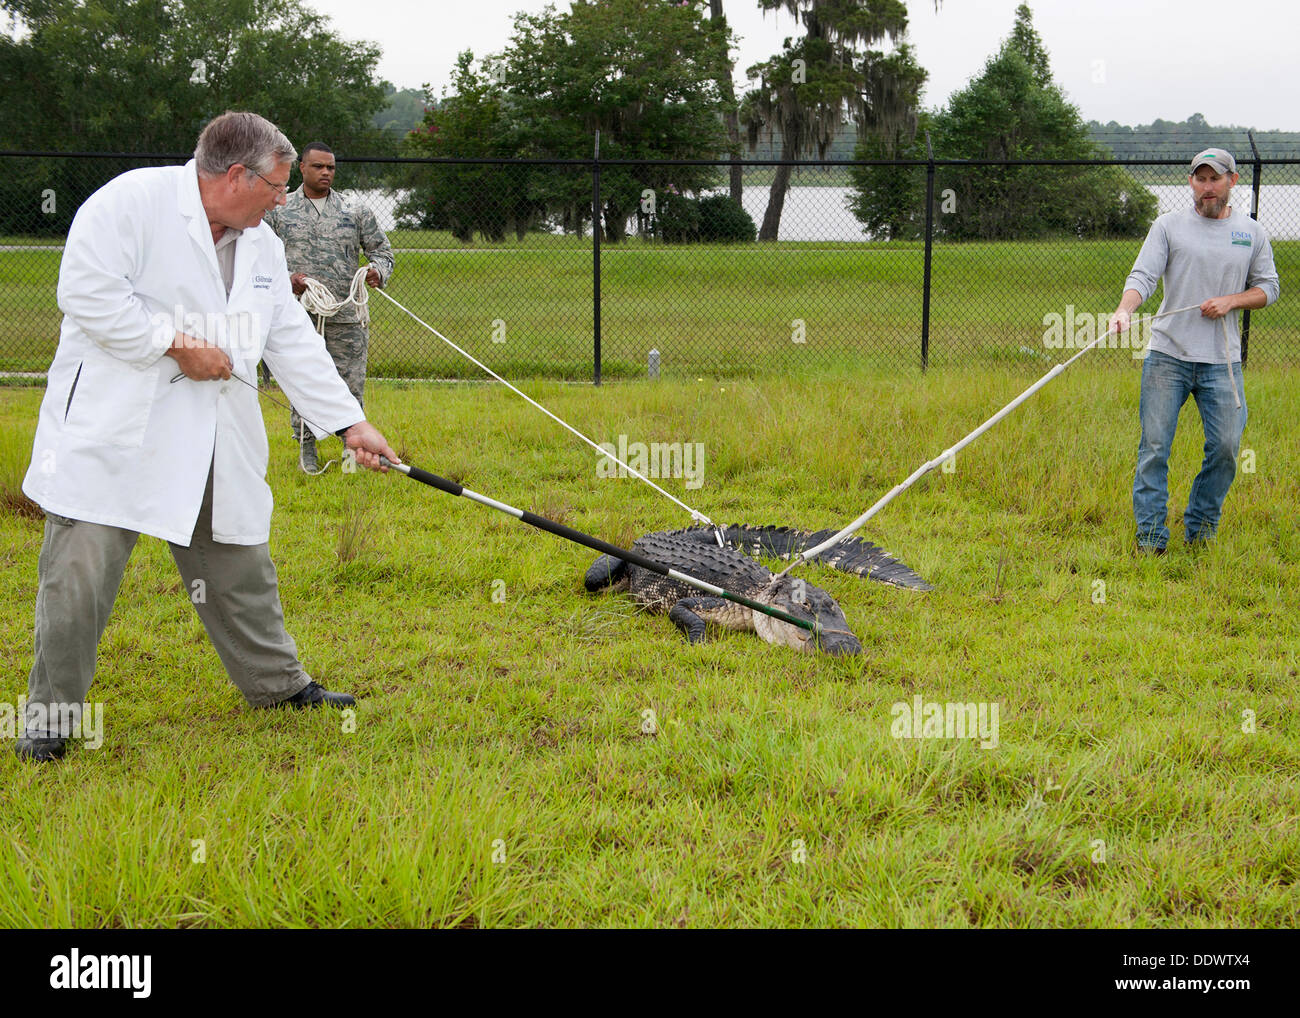 USDA biologist assisted by a US Air Force Airmen capture a nuisance alligator July 25, 2013 at Moody Air Force Base, GA., July 25, 2013. The alligator had to be relocated after it lost fear of people due to illegal feeding. Stock Photo